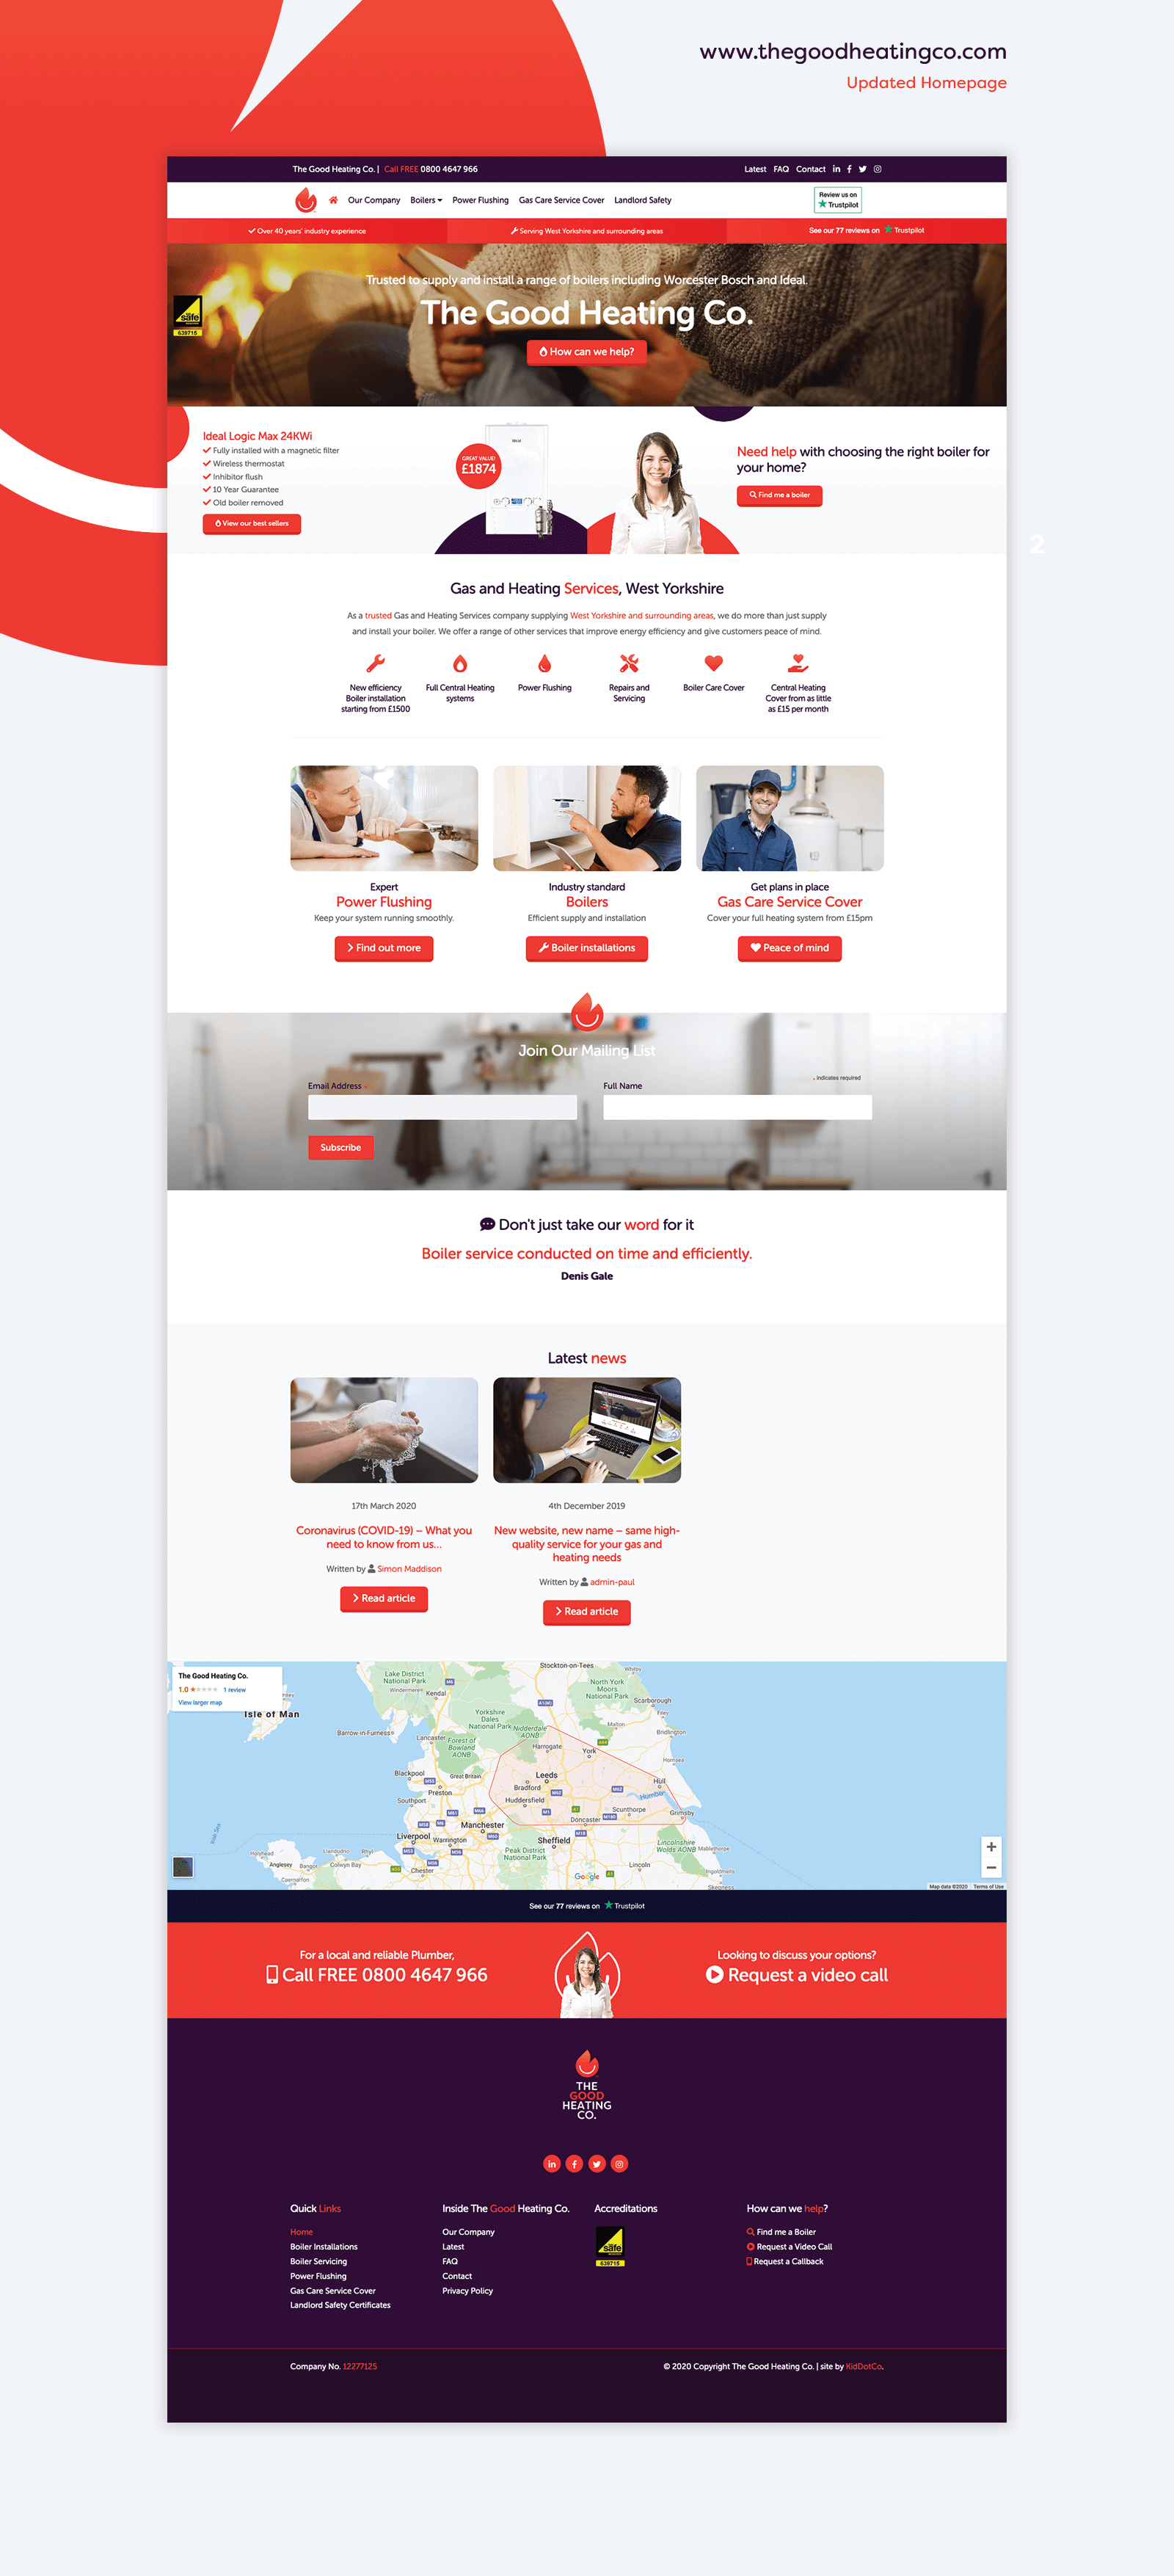 The Good Heating Co - New Website Features